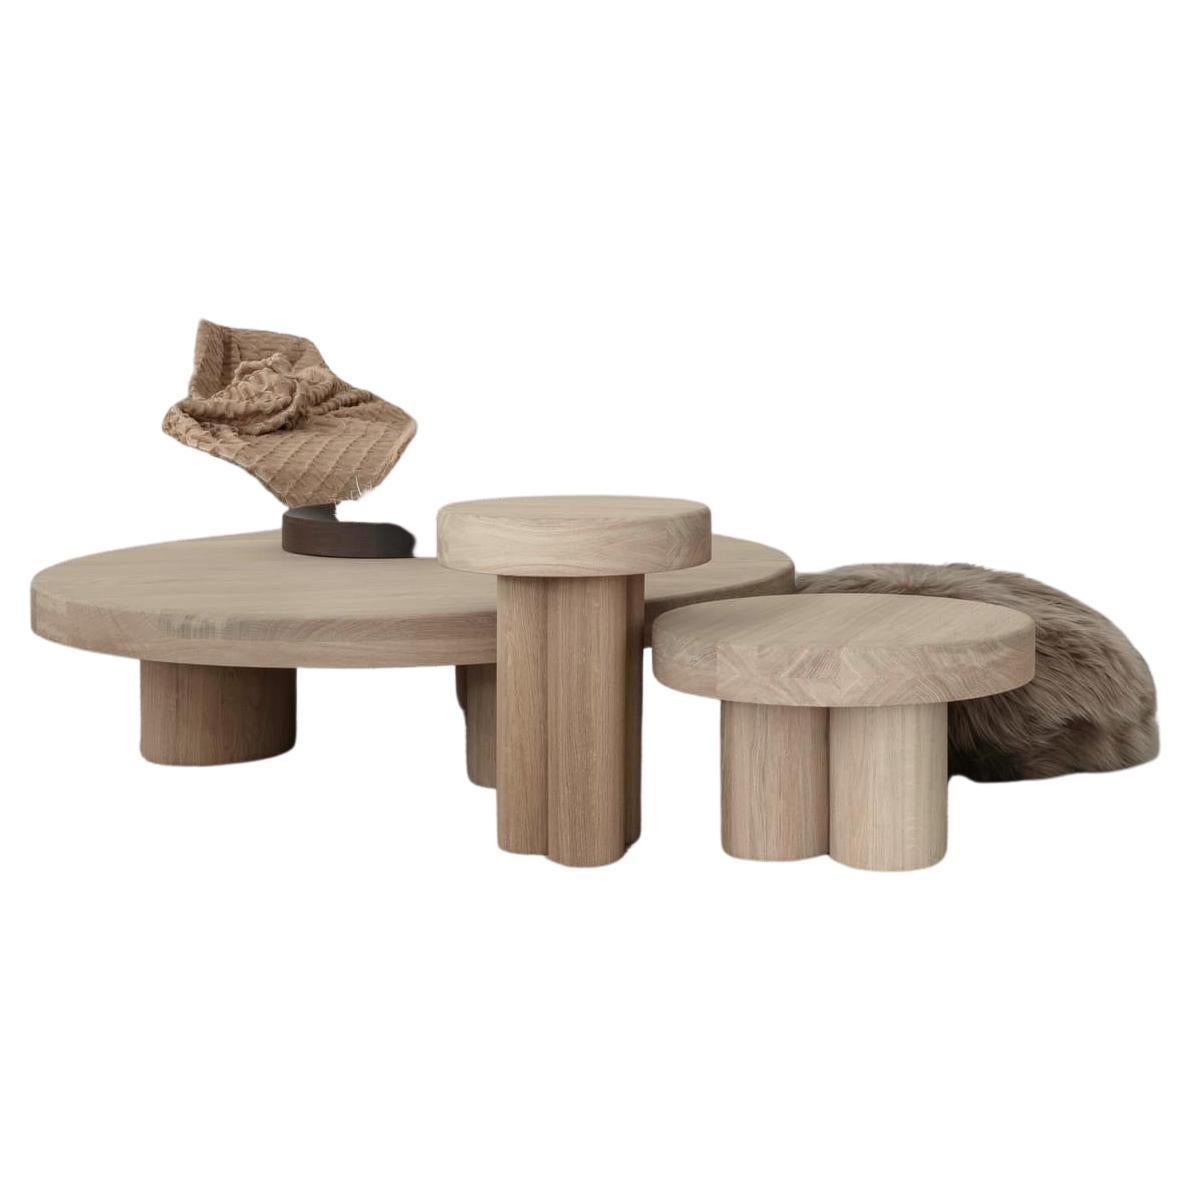 Kluskens Thick-Wood Coffee Tables For Sale